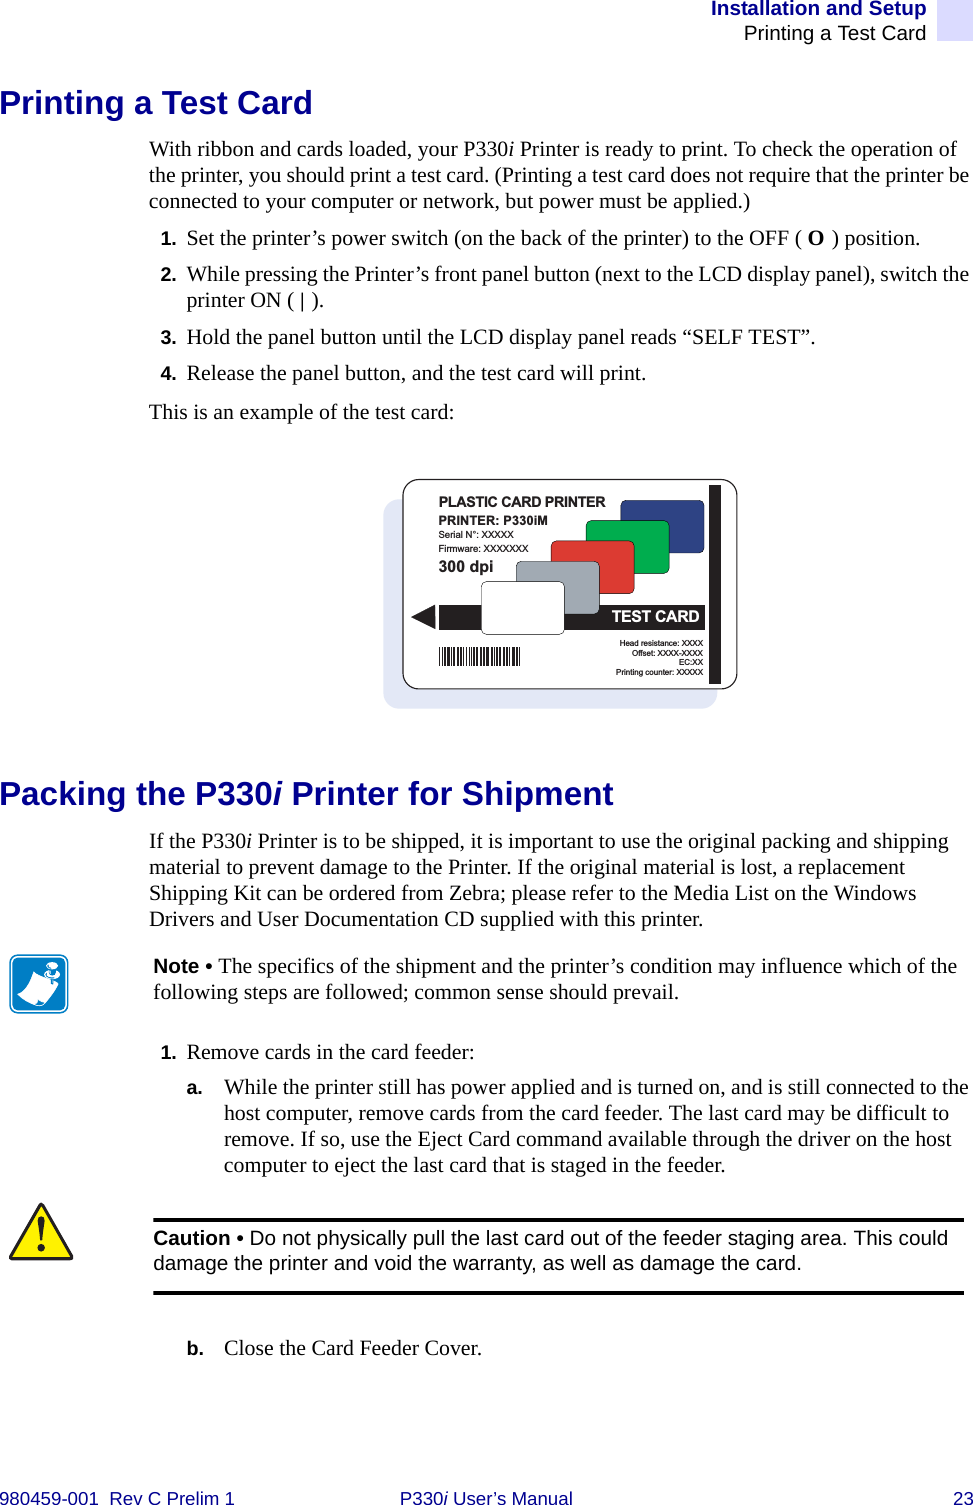 Installation and SetupPrinting a Test Card980459-001  Rev C Prelim 1 P330i User’s Manual 23Printing a Test CardWith ribbon and cards loaded, your P330i Printer is ready to print. To check the operation of the printer, you should print a test card. (Printing a test card does not require that the printer be connected to your computer or network, but power must be applied.)1. Set the printer’s power switch (on the back of the printer) to the OFF ( O ) position.2. While pressing the Printer’s front panel button (next to the LCD display panel), switch the printer ON ( | ).3. Hold the panel button until the LCD display panel reads “SELF TEST”.4. Release the panel button, and the test card will print.This is an example of the test card:Packing the P330i Printer for ShipmentIf the P330i Printer is to be shipped, it is important to use the original packing and shipping material to prevent damage to the Printer. If the original material is lost, a replacement Shipping Kit can be ordered from Zebra; please refer to the Media List on the Windows Drivers and User Documentation CD supplied with this printer.1. Remove cards in the card feeder:a. While the printer still has power applied and is turned on, and is still connected to the host computer, remove cards from the card feeder. The last card may be difficult to remove. If so, use the Eject Card command available through the driver on the host computer to eject the last card that is staged in the feeder.b. Close the Card Feeder Cover.PRINTER: P330iMSerial N°: XXXXXFirmware: XXXXXXXHead resistance: XXXXOffset: XXXX-XXXXEC:XXPrinting counter: XXXXX300 dpiPLASTIC CARD PRINTERTEST CARDNote • The specifics of the shipment and the printer’s condition may influence which of the following steps are followed; common sense should prevail.Caution • Do not physically pull the last card out of the feeder staging area. This could damage the printer and void the warranty, as well as damage the card.